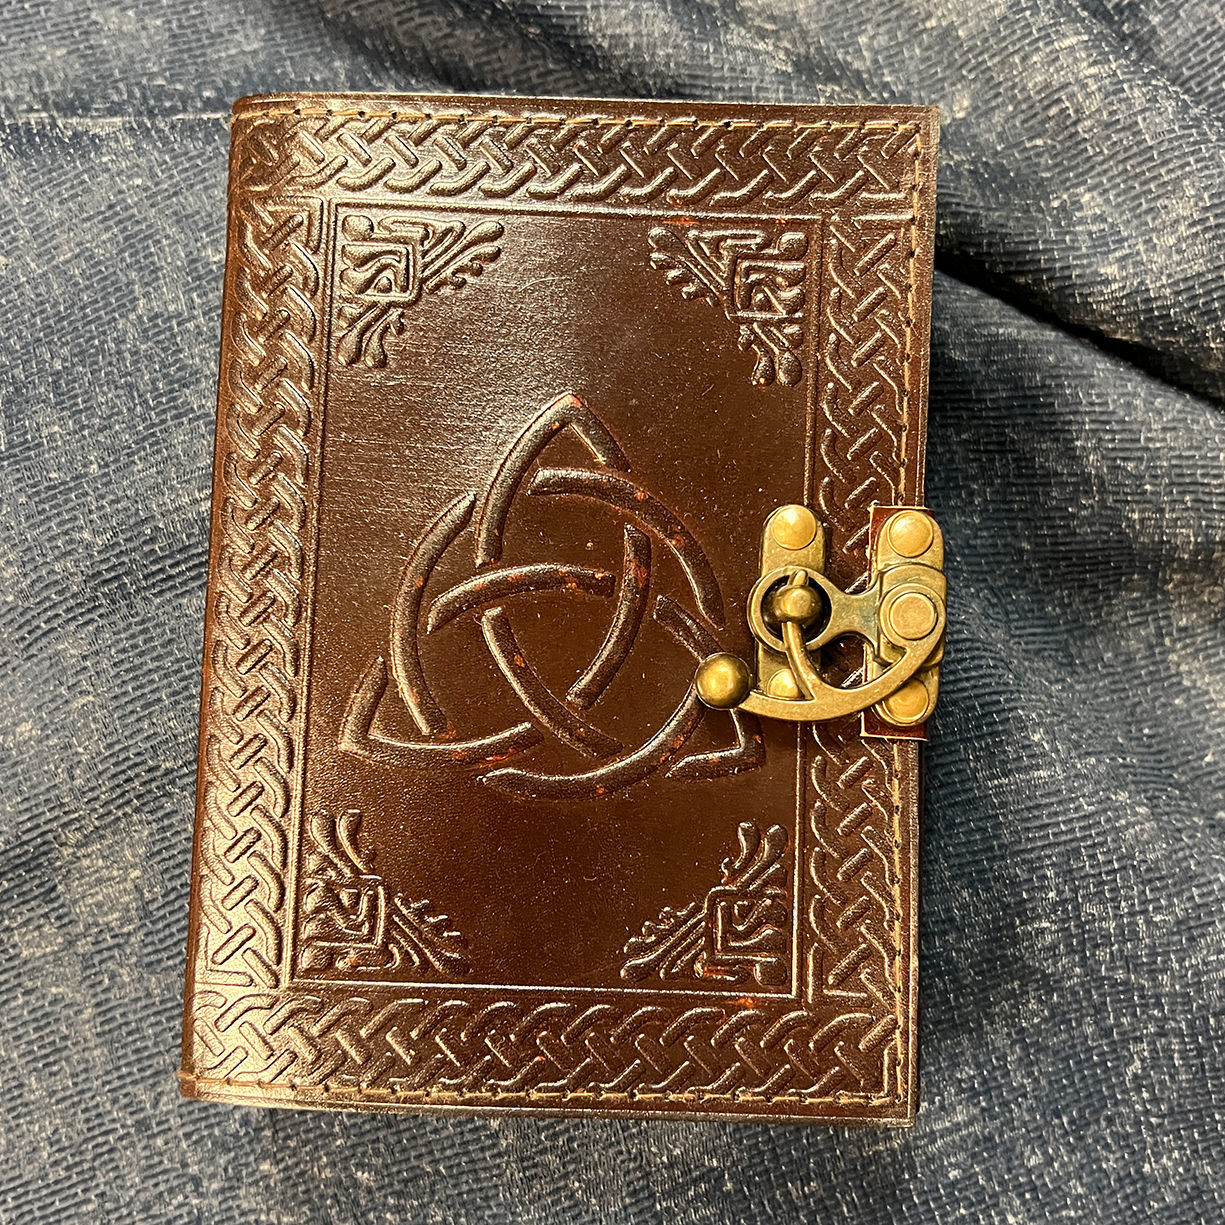 Trinity Knot Leather Journal bound with 120 pages of handmade parchment paper and working antiqued brass latch for closure